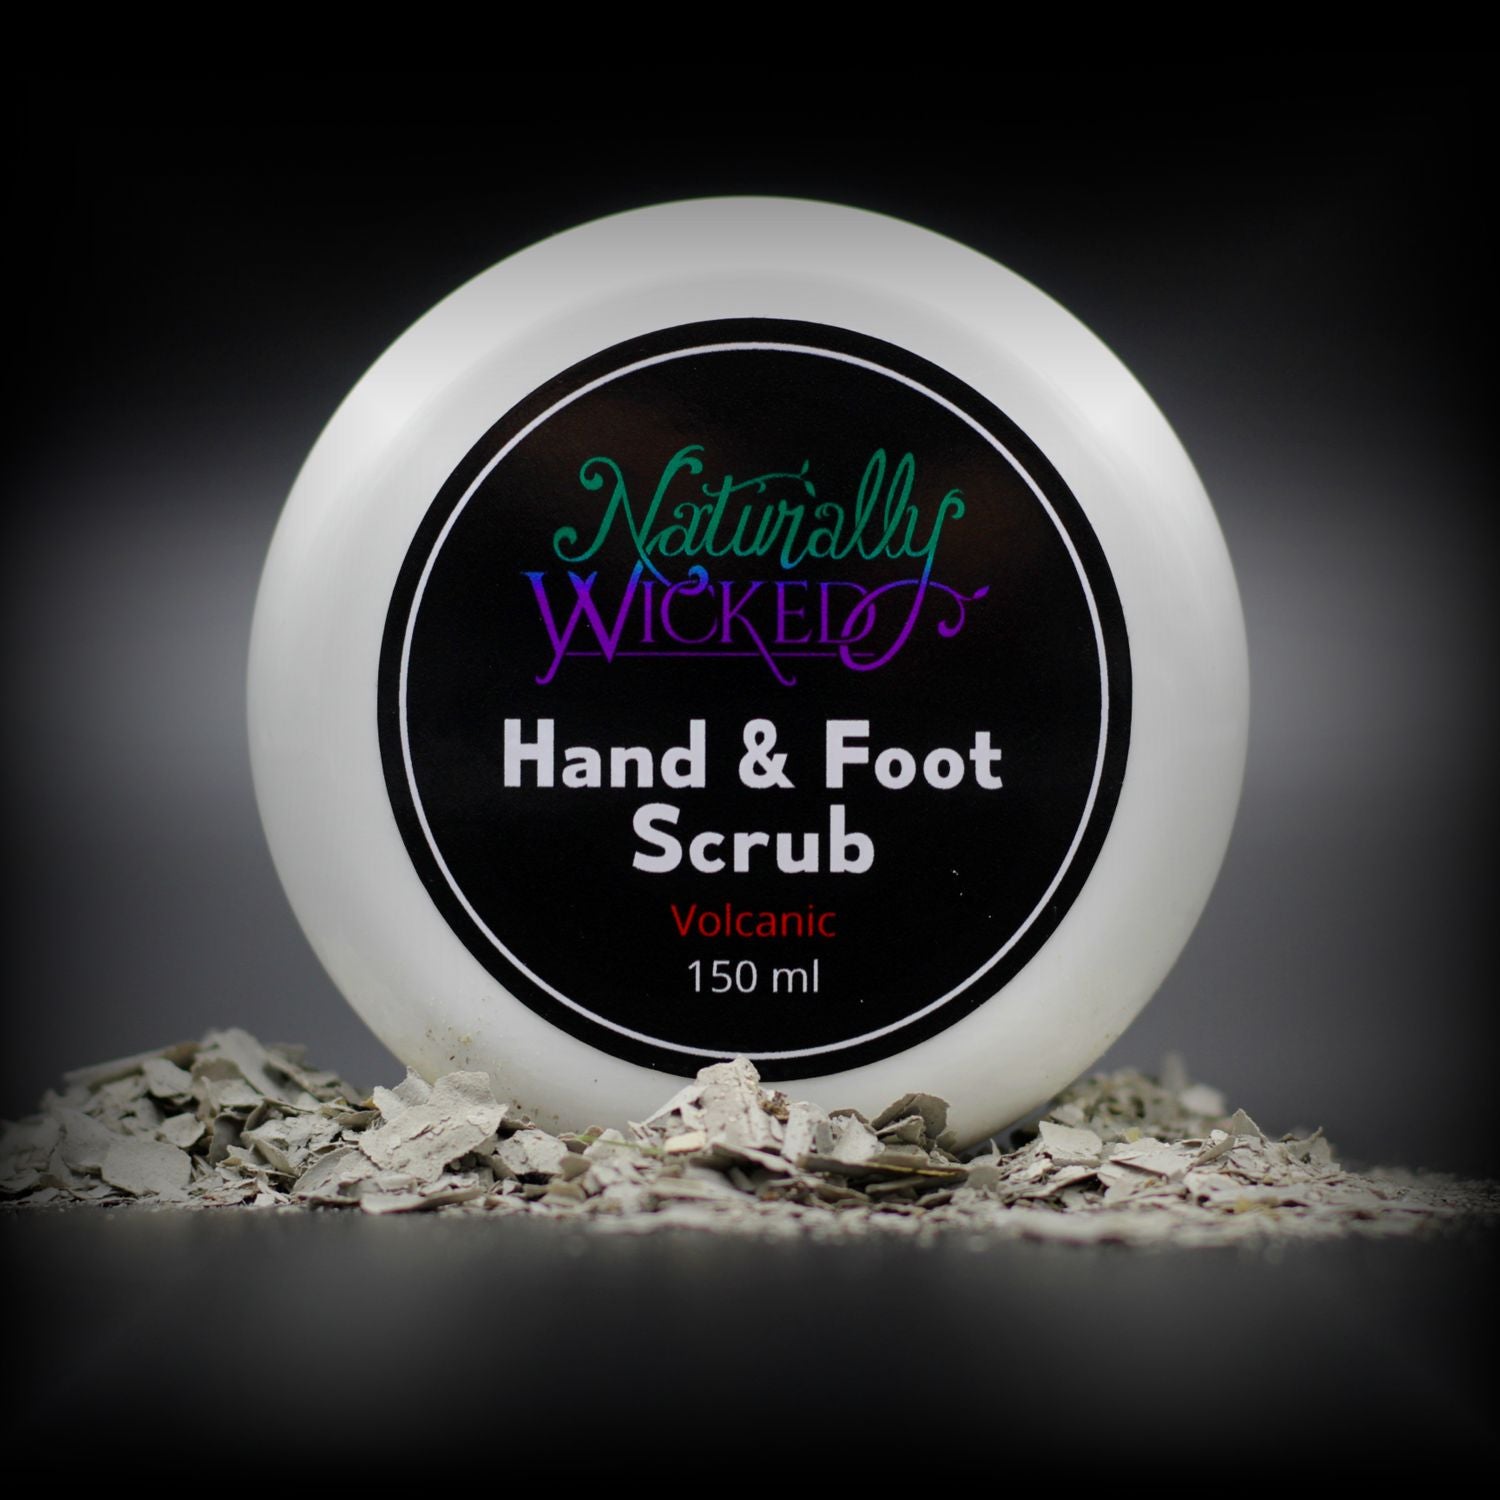 Naturally Wicked Volcanic Hand & Foot Scrub Lid In White Volcanic Ash